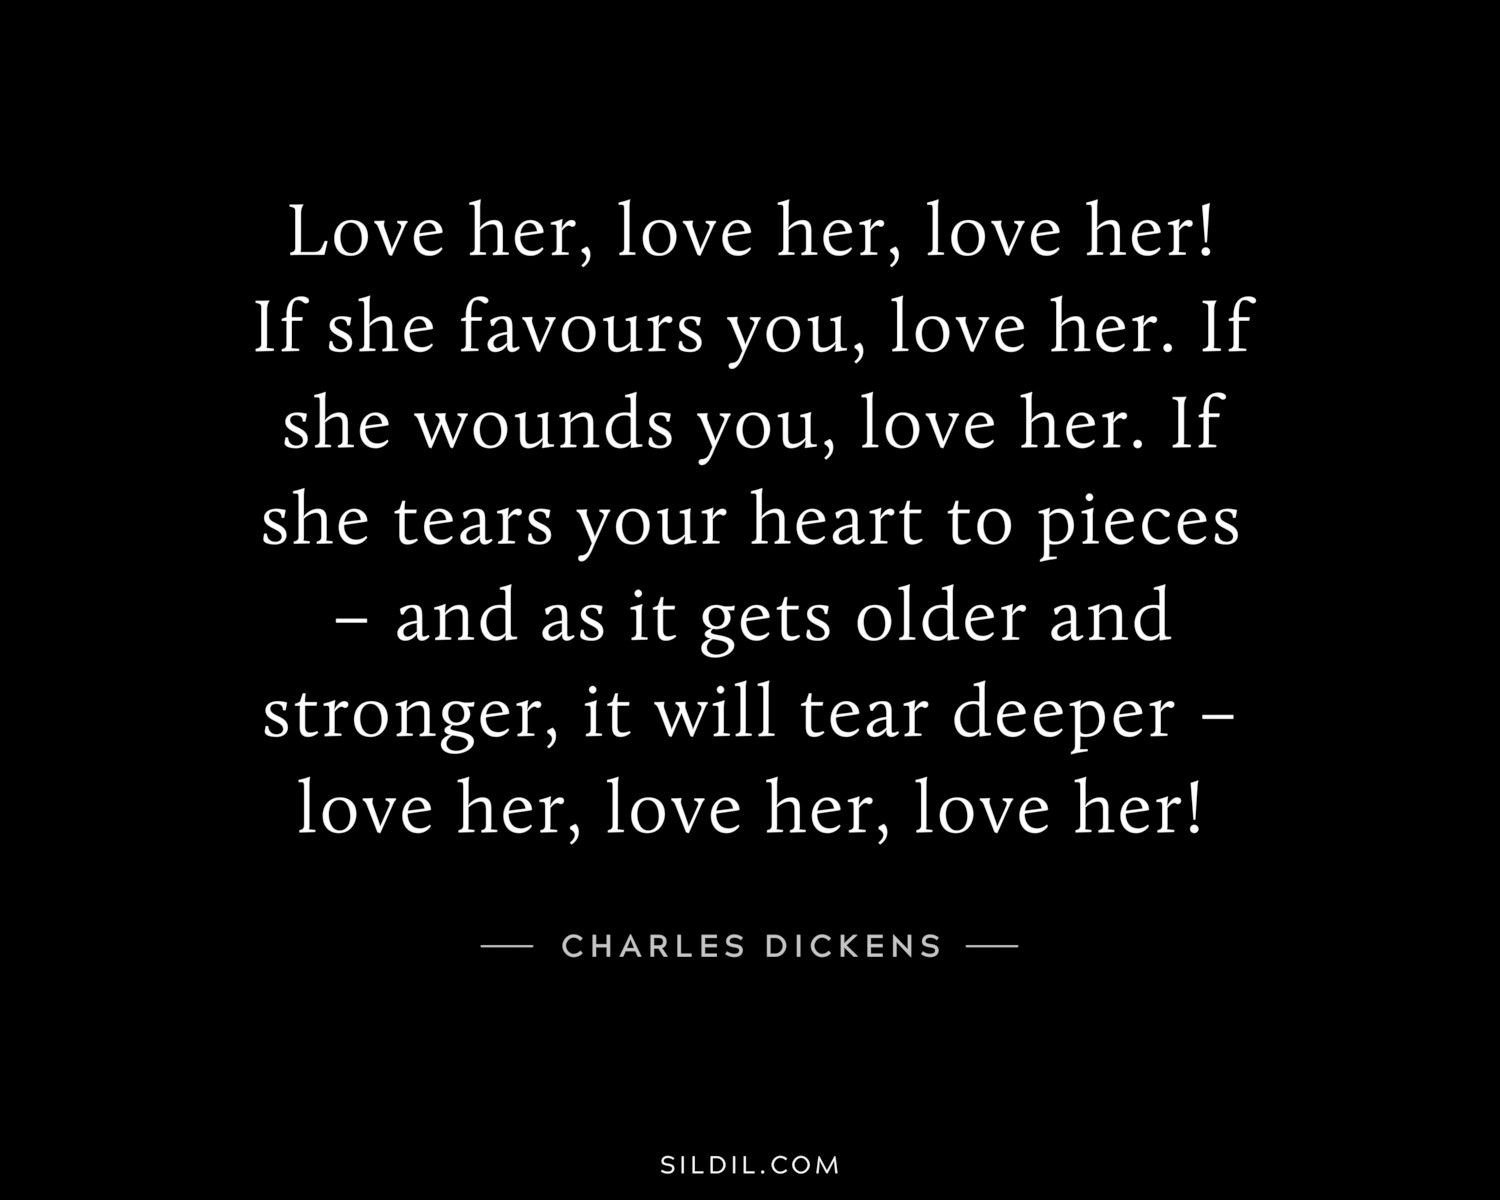 Love her, love her, love her! If she favours you, love her. If she wounds you, love her. If she tears your heart to pieces – and as it gets older and stronger, it will tear deeper – love her, love her, love her!